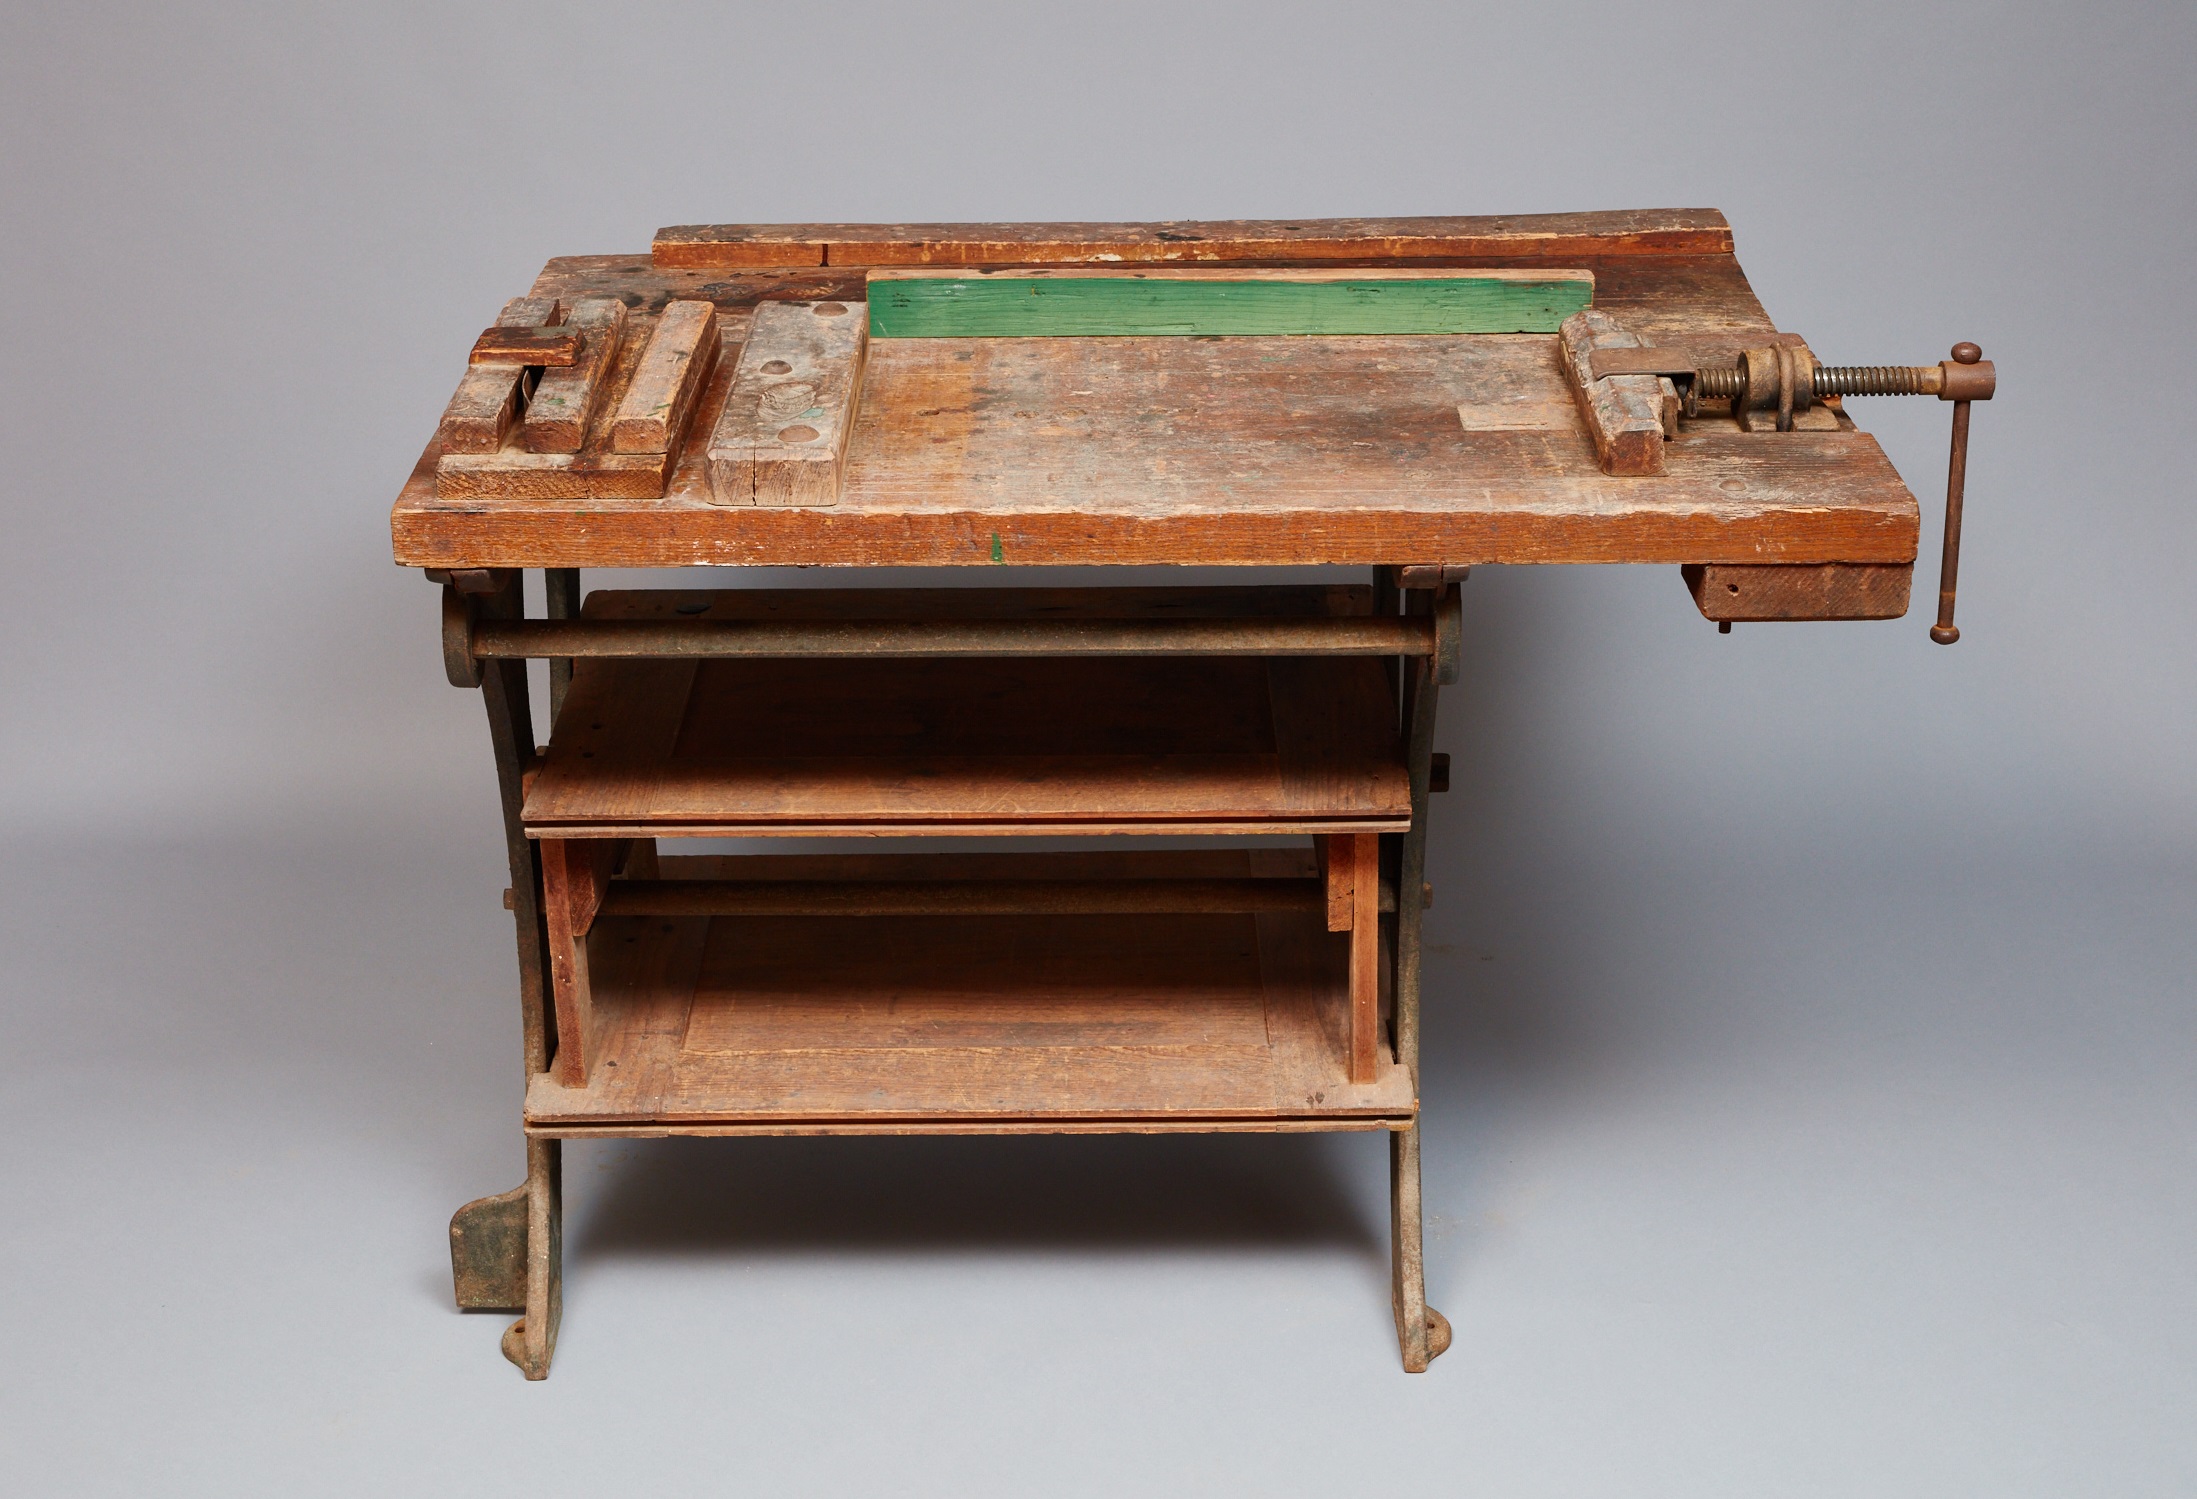 An old wooden workbench with a green top.